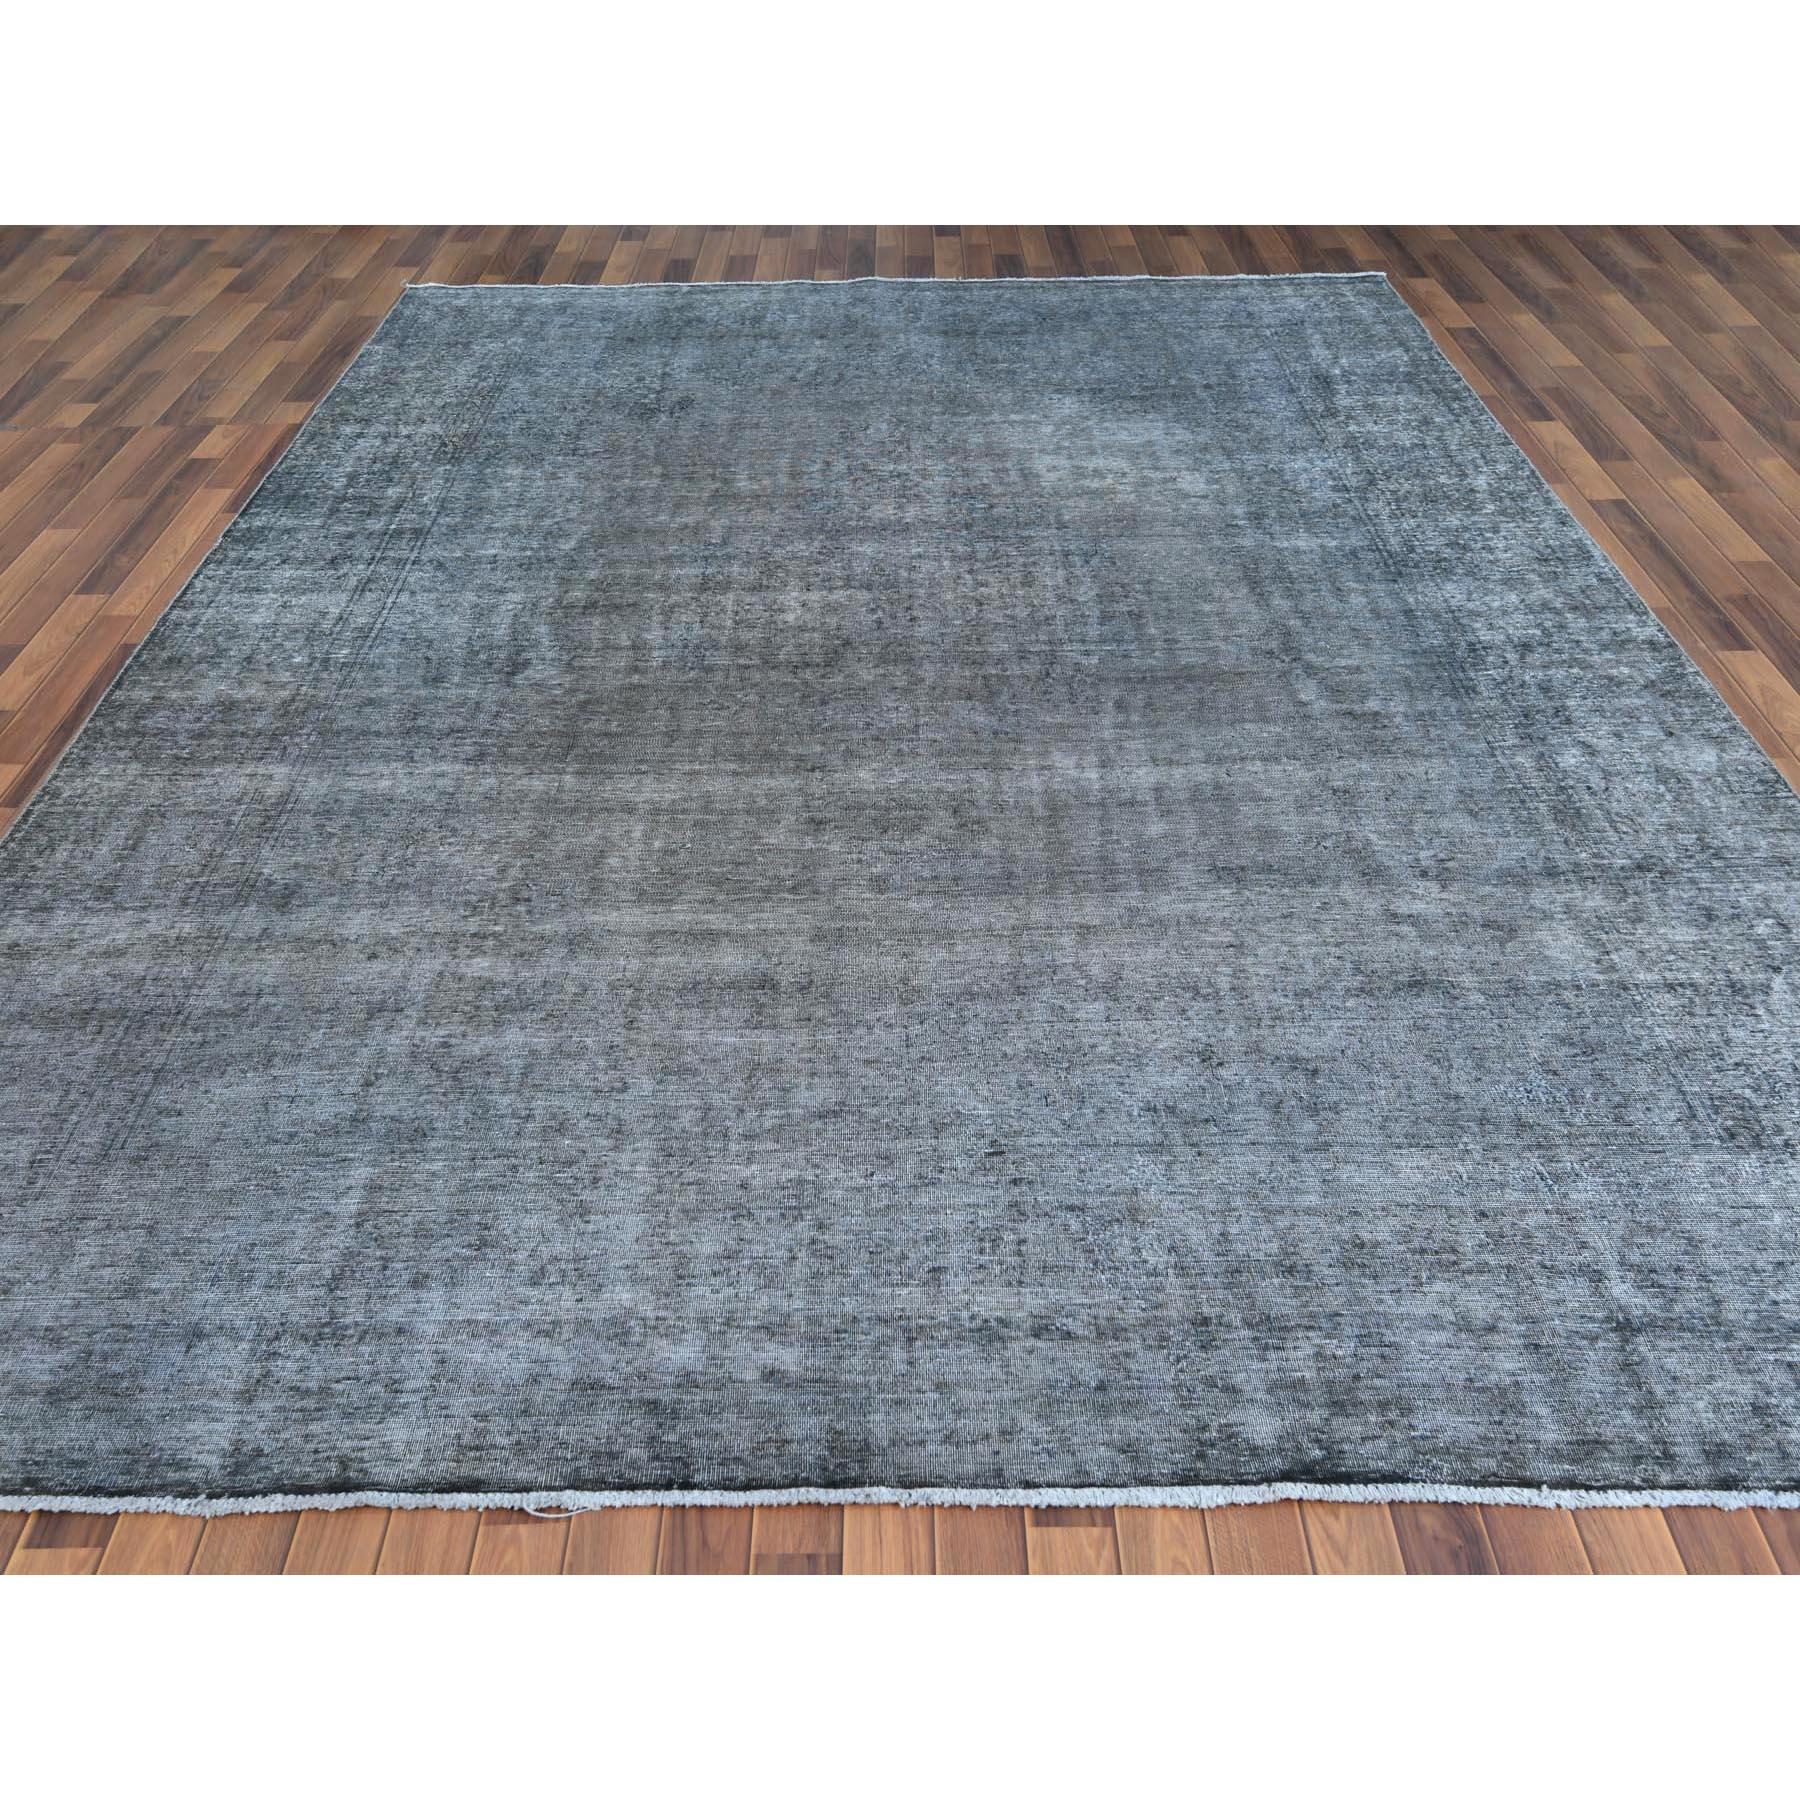 Medieval Gray Overcast Vintage Persian Kerman Hand Knotted Oriental Rug